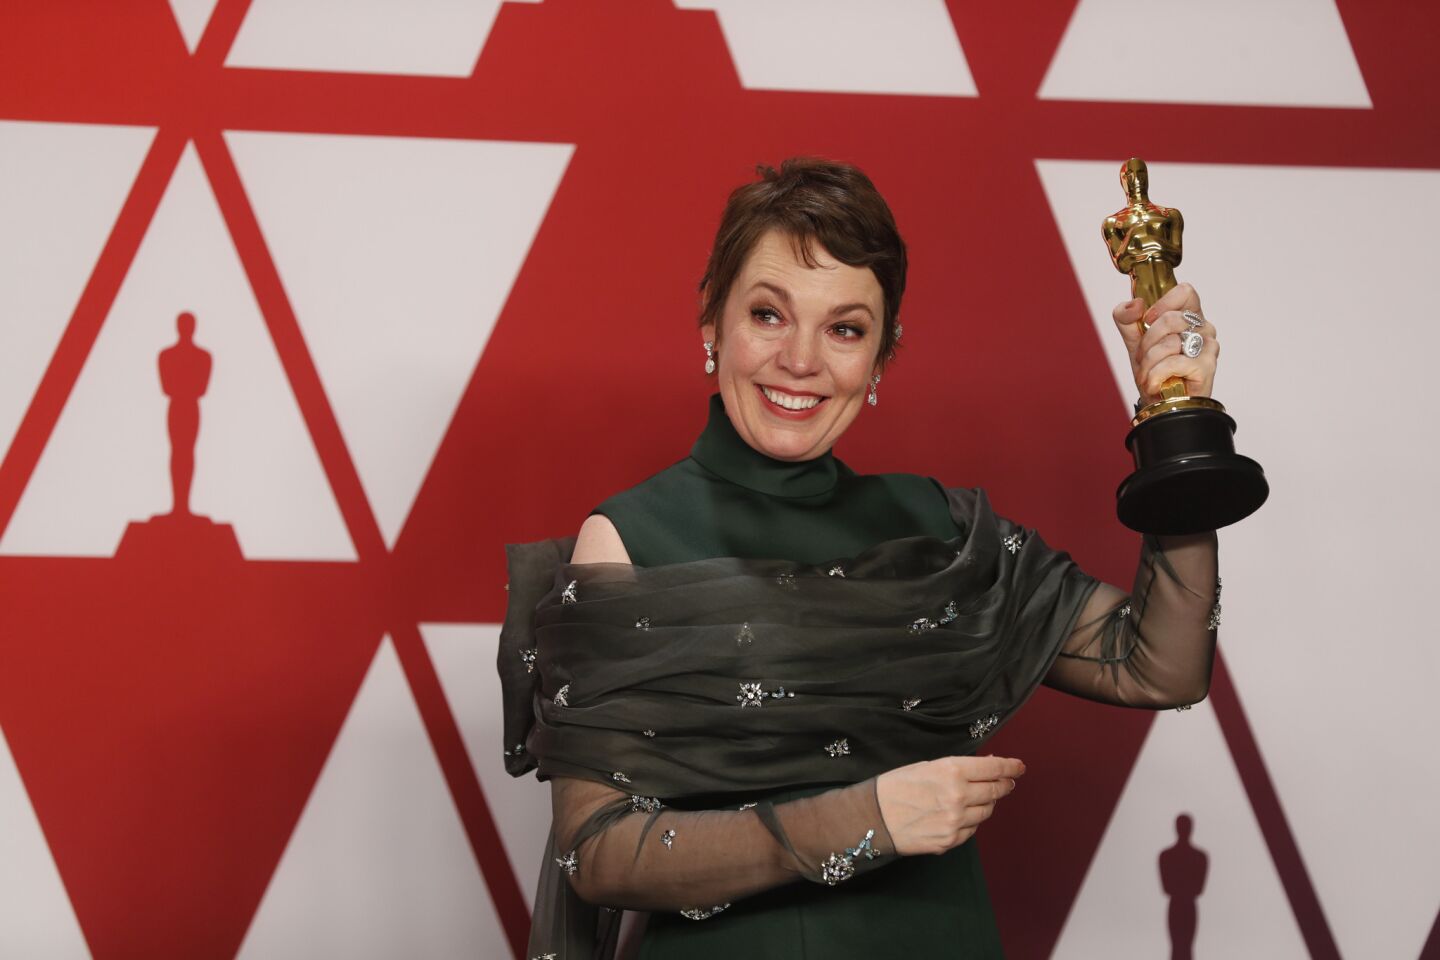 Olivia Colman, winner of the lead actress Oscar for her role in "The Favourite."